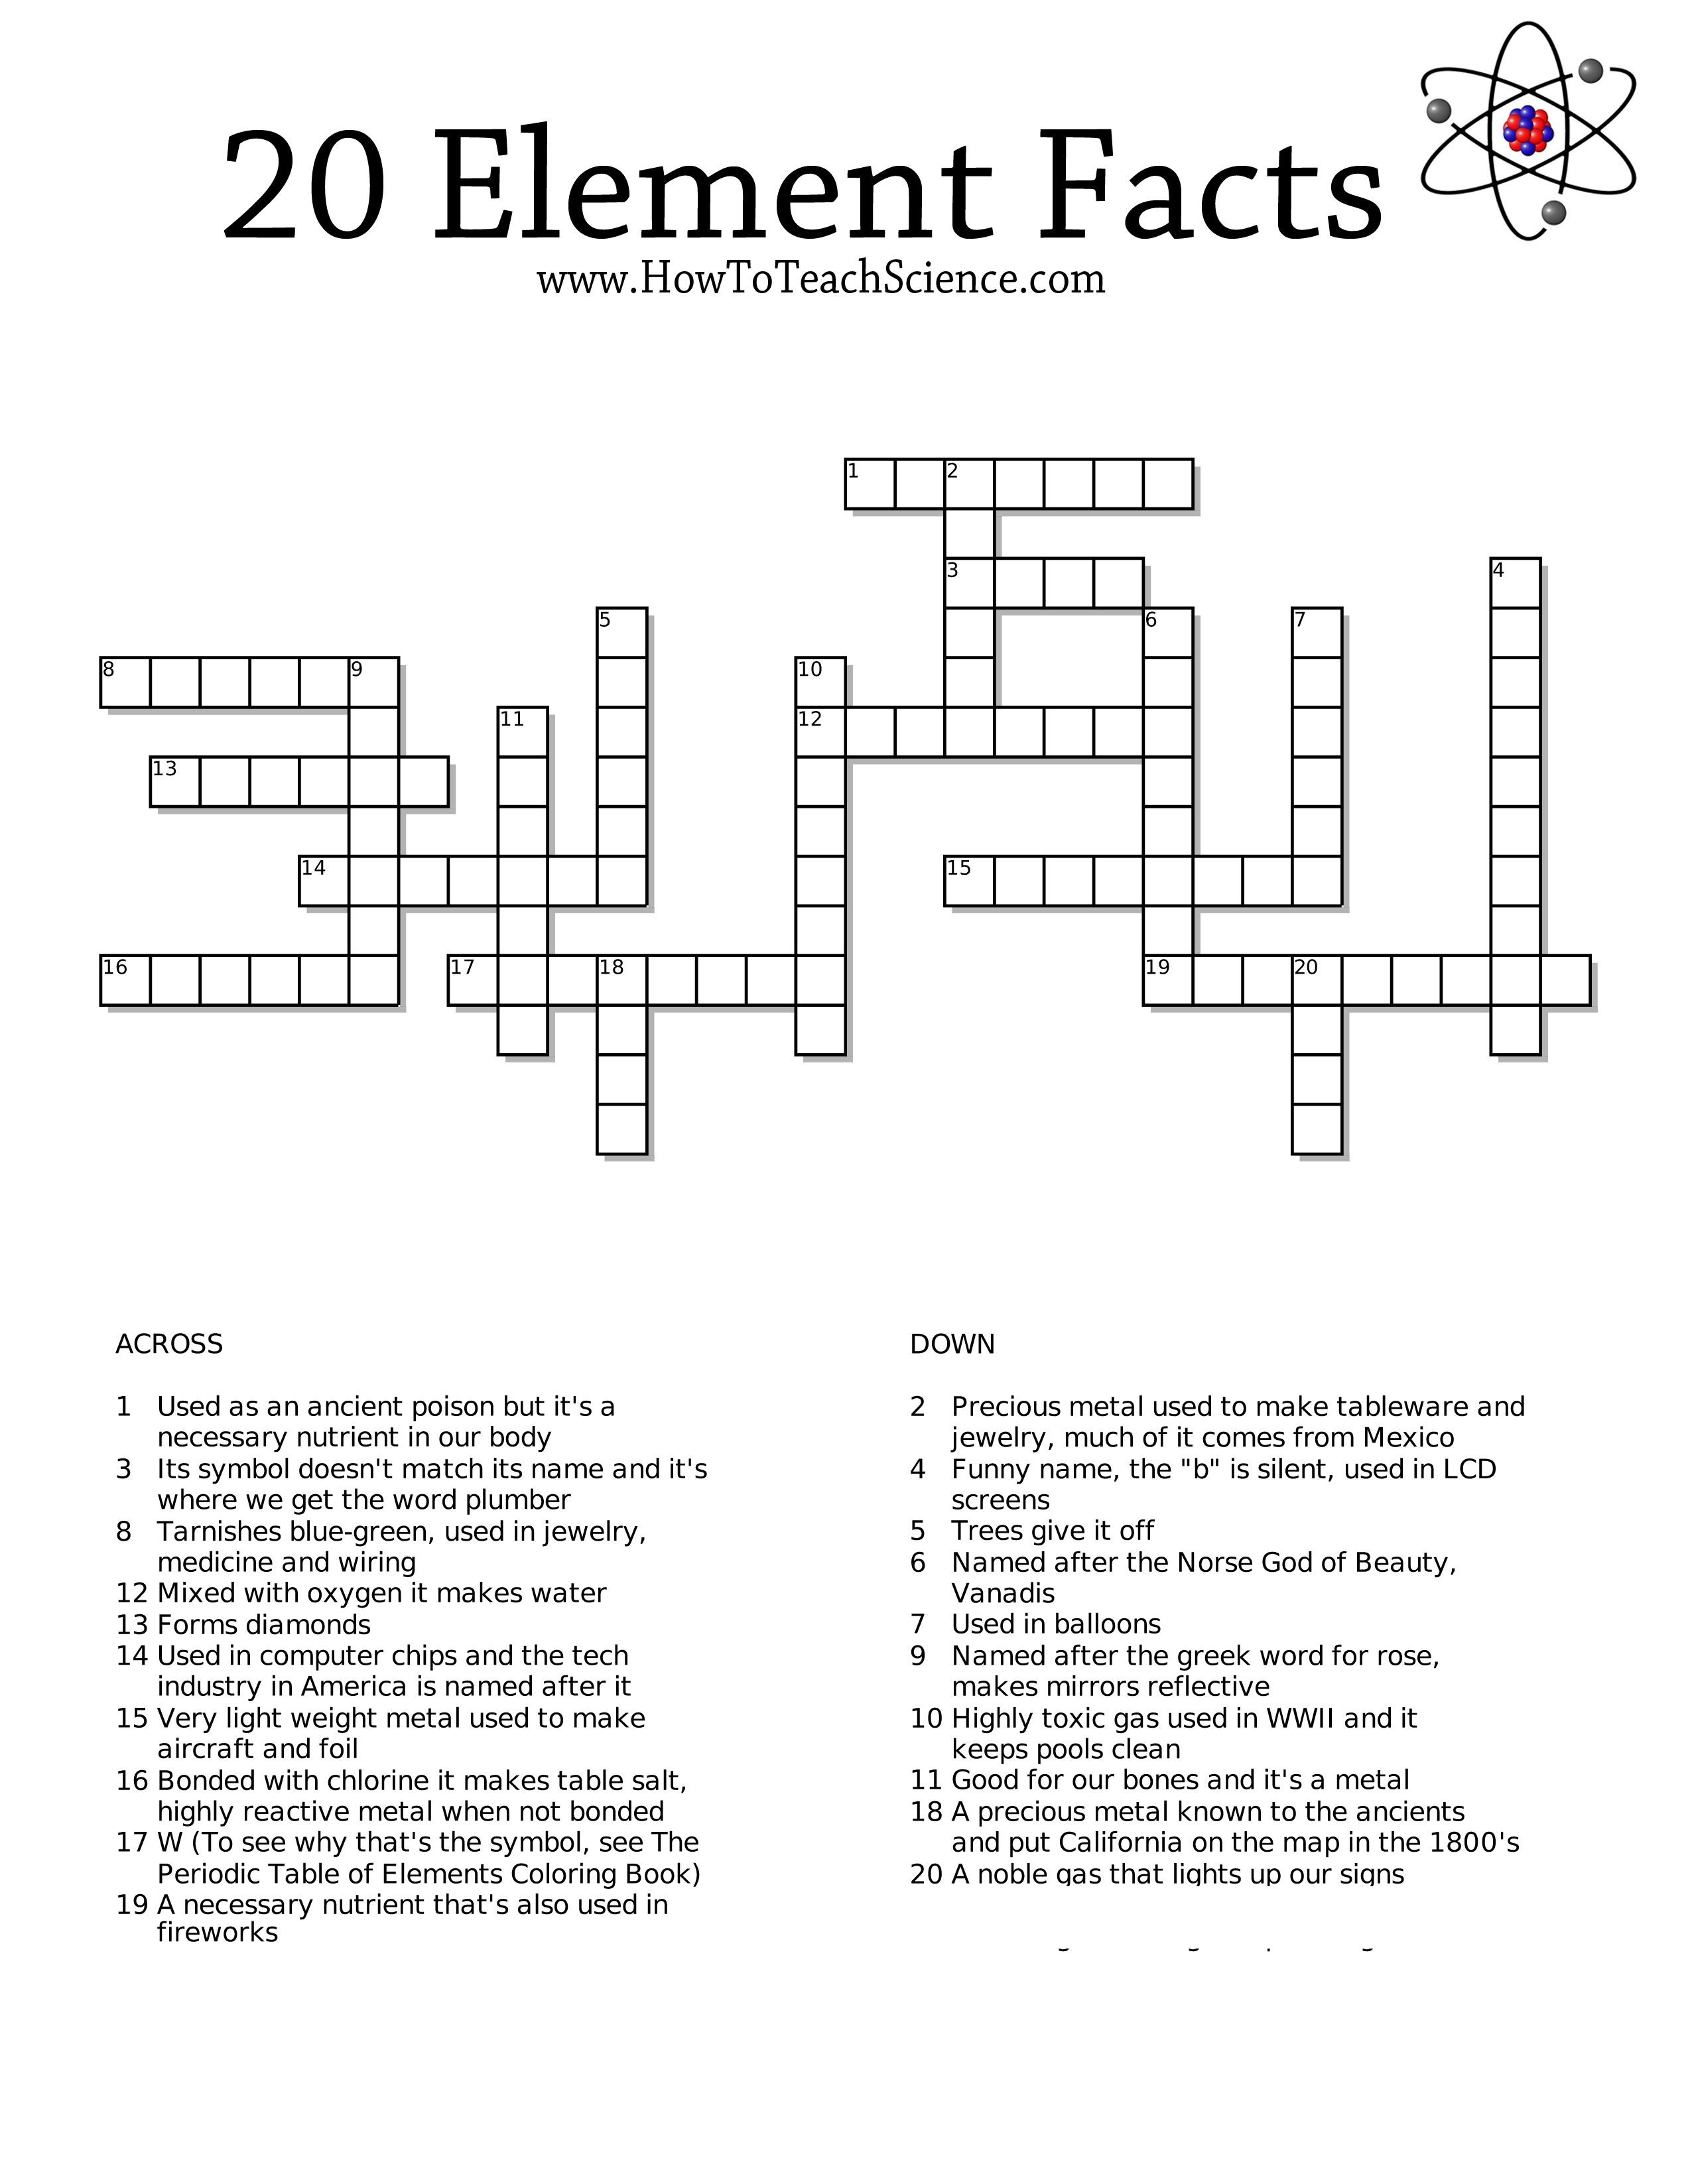 Free Crossword Printables On The Elements For 3Rd Grade Through High - Crossword Puzzle Chemistry Printable